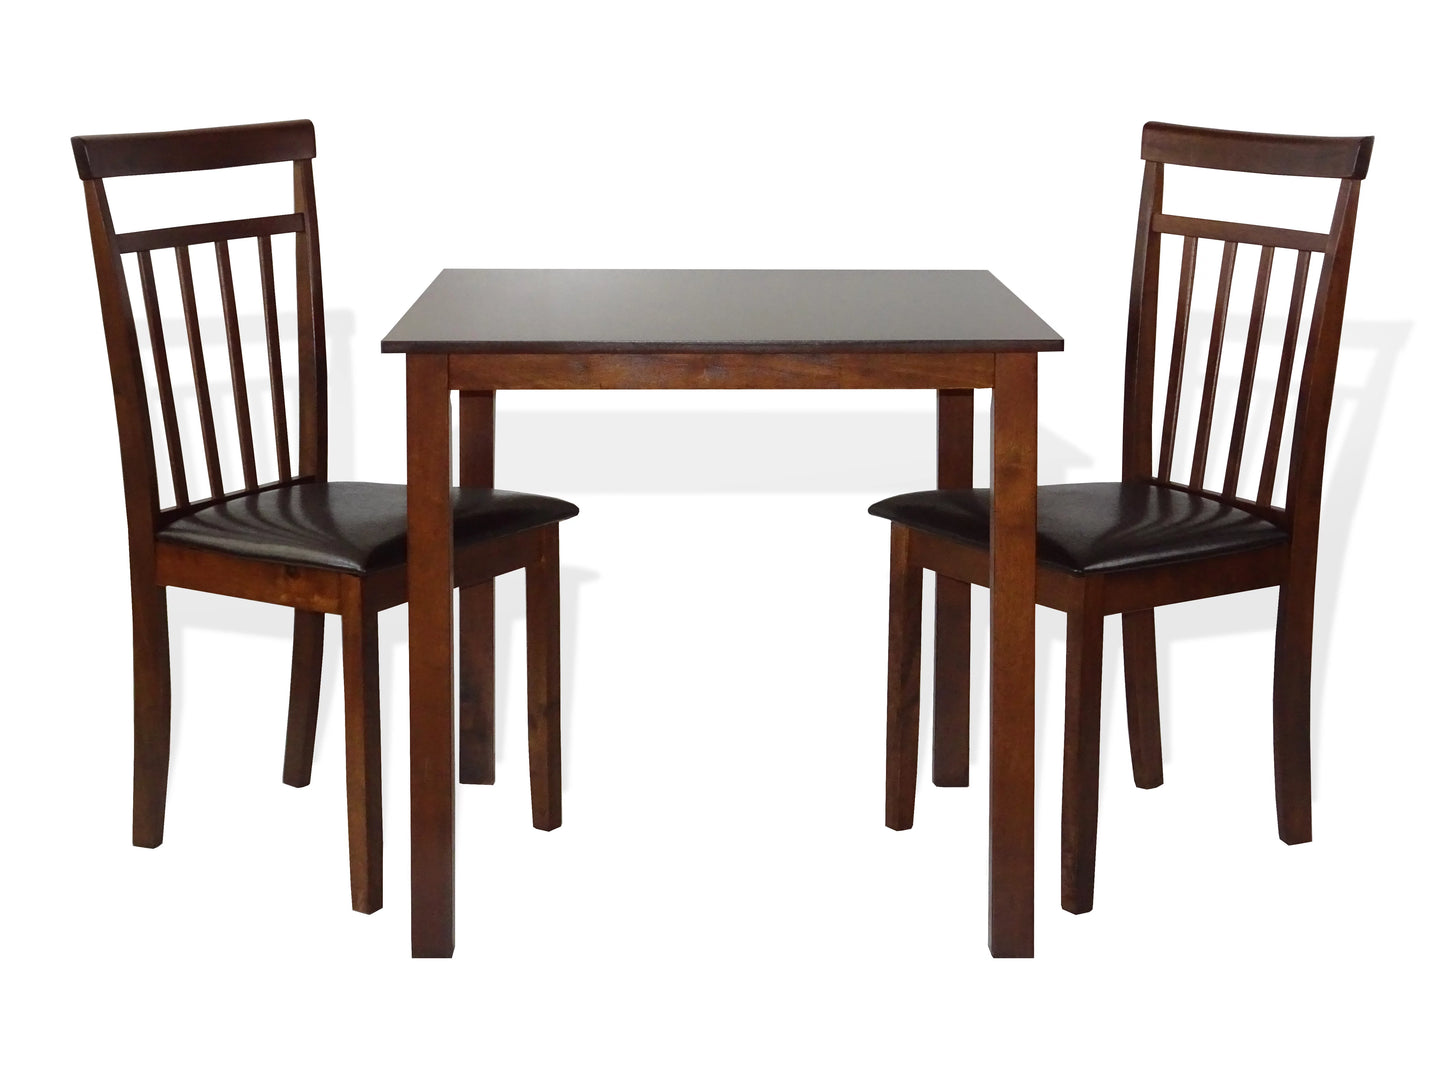 3 Pc Dining Kitchen Set of Square Table and 2 Classic Warm Solid Wooden Chairs, Medium Brown